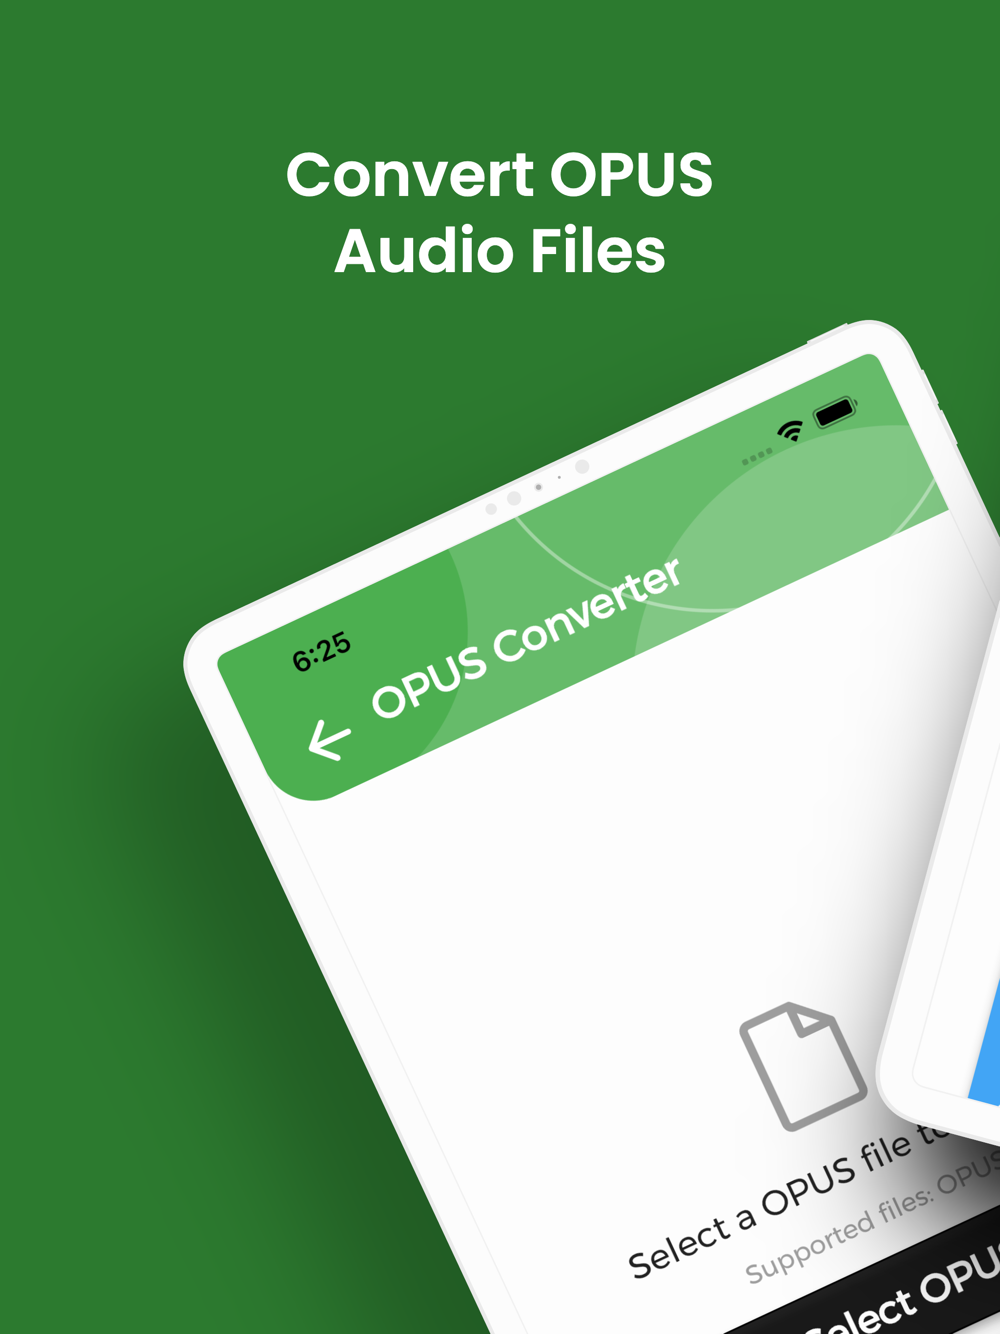 OPUS Converter, OPUS to MP3 Free Download App for iPhone - STEPrimo.com